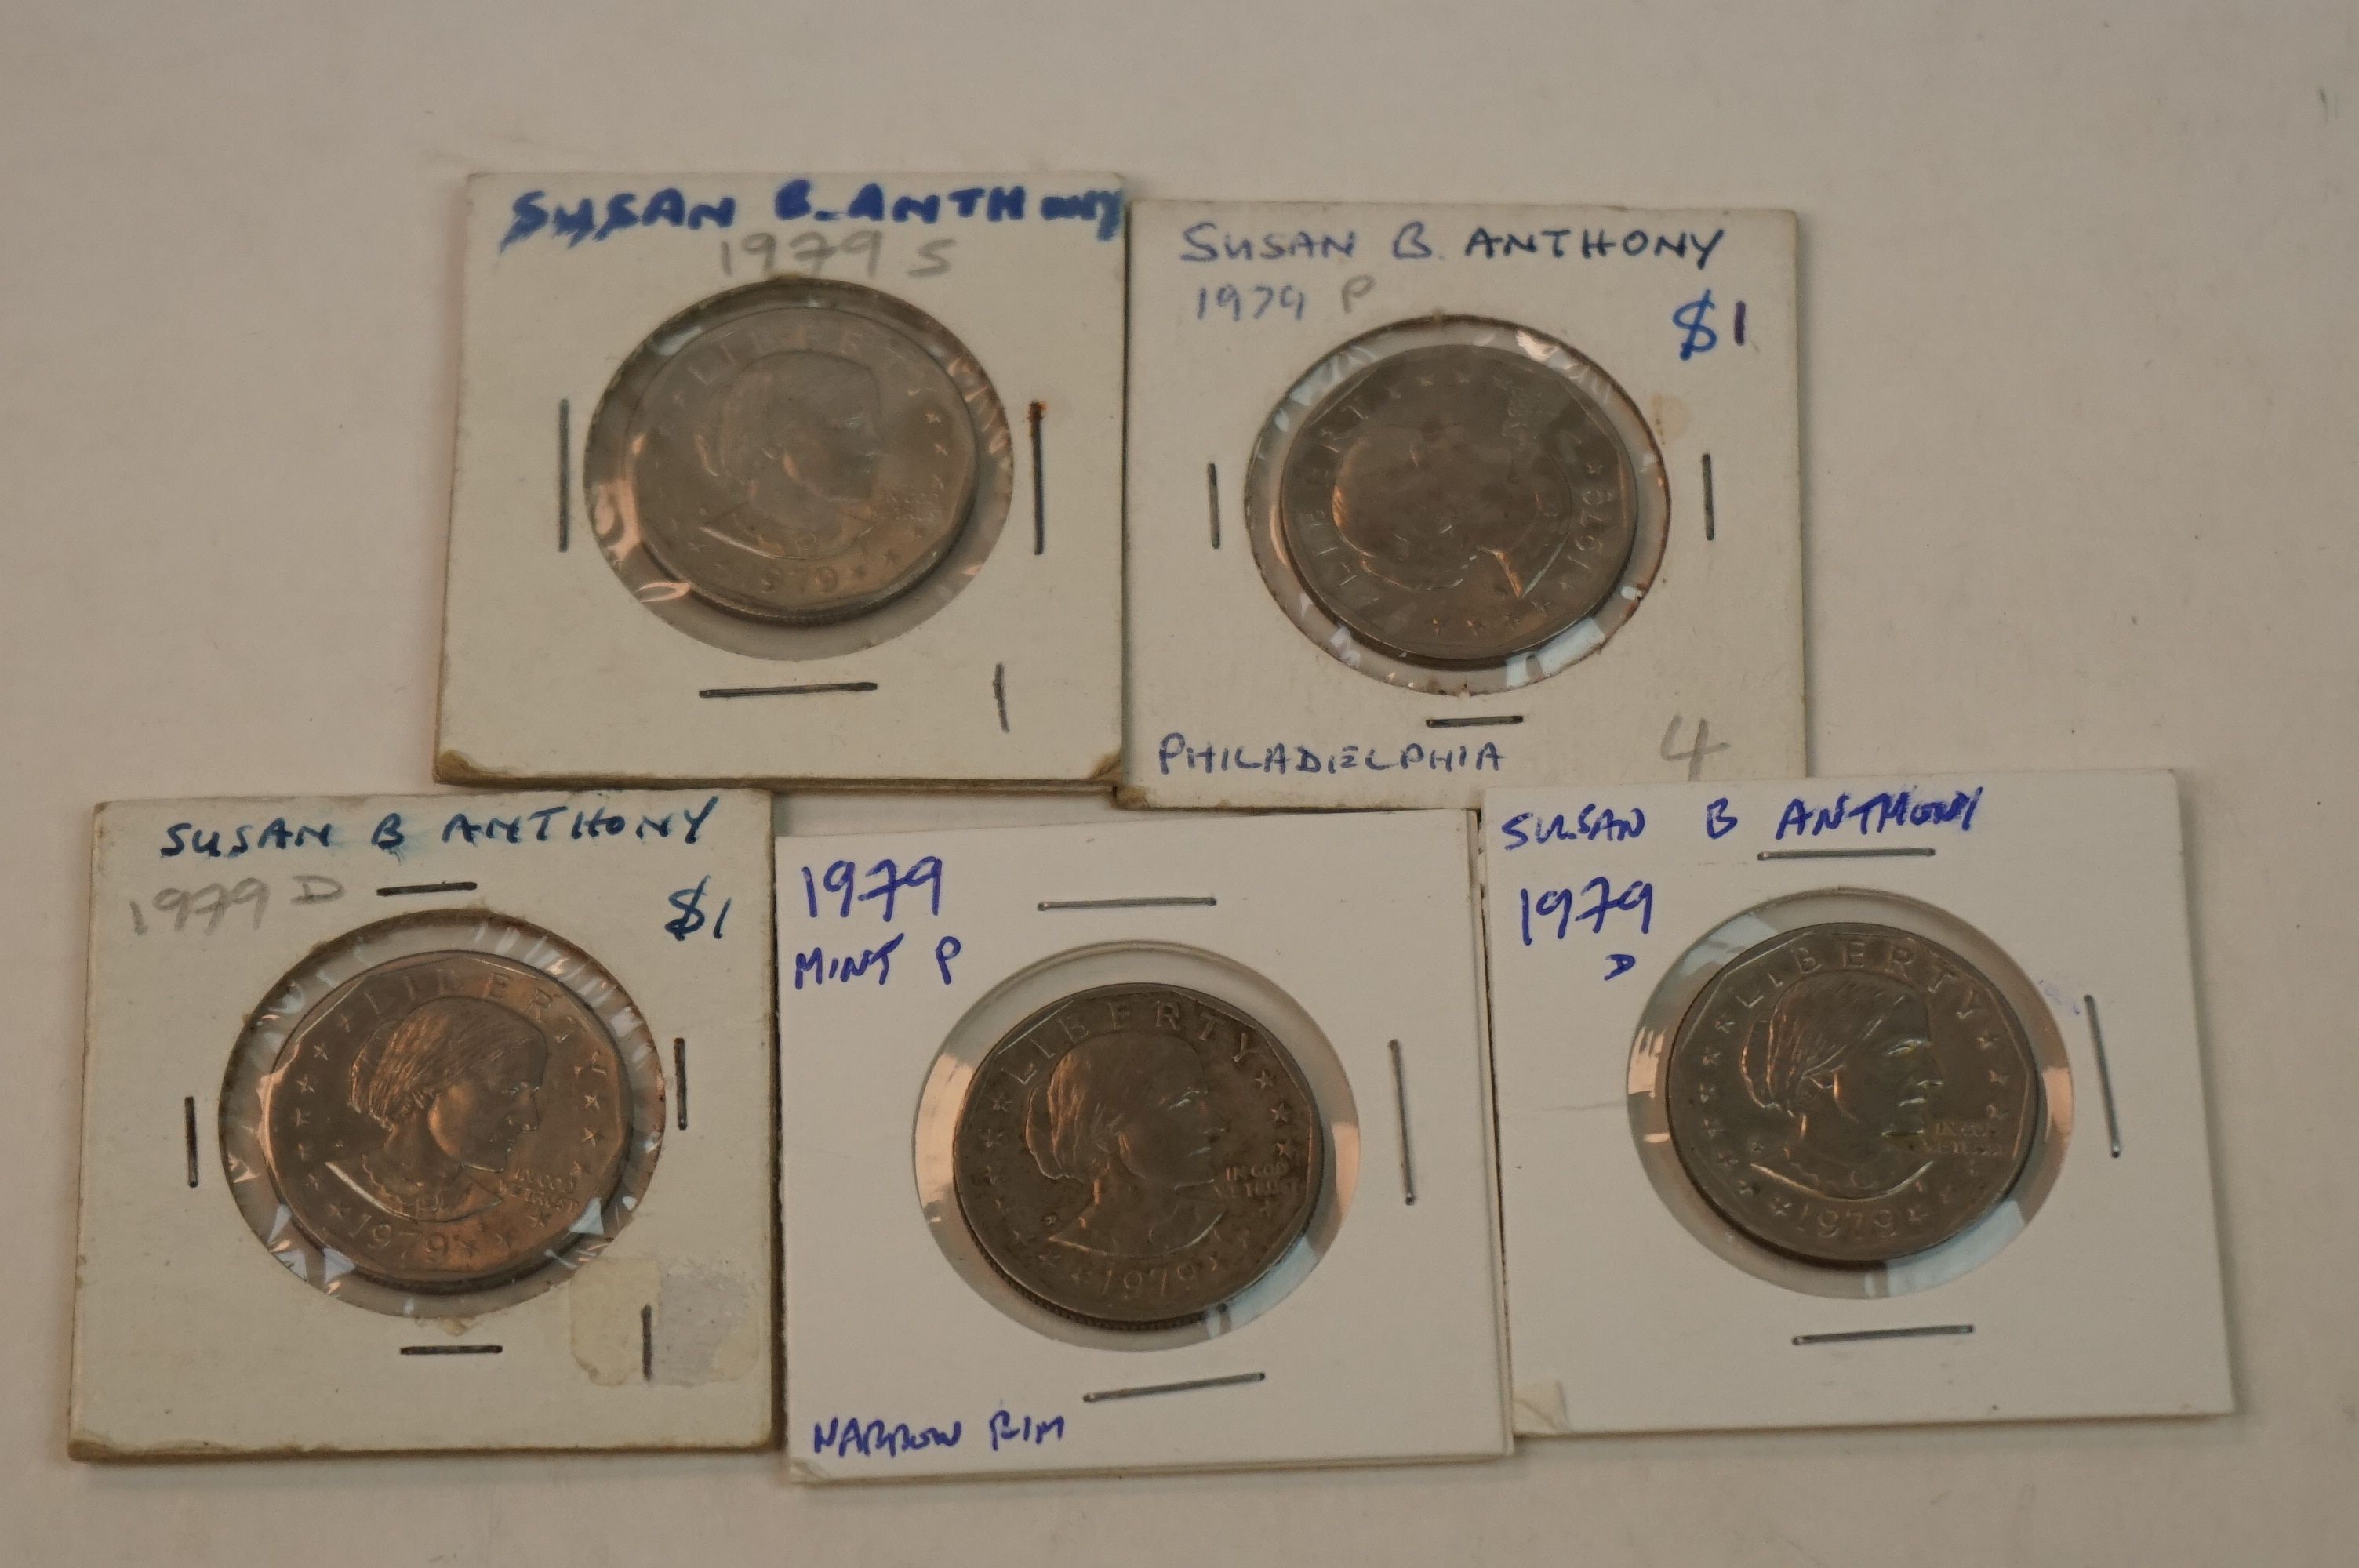 Five United States Of America Susan B Anthony Dollars with mint marks for Denver, San Francisco